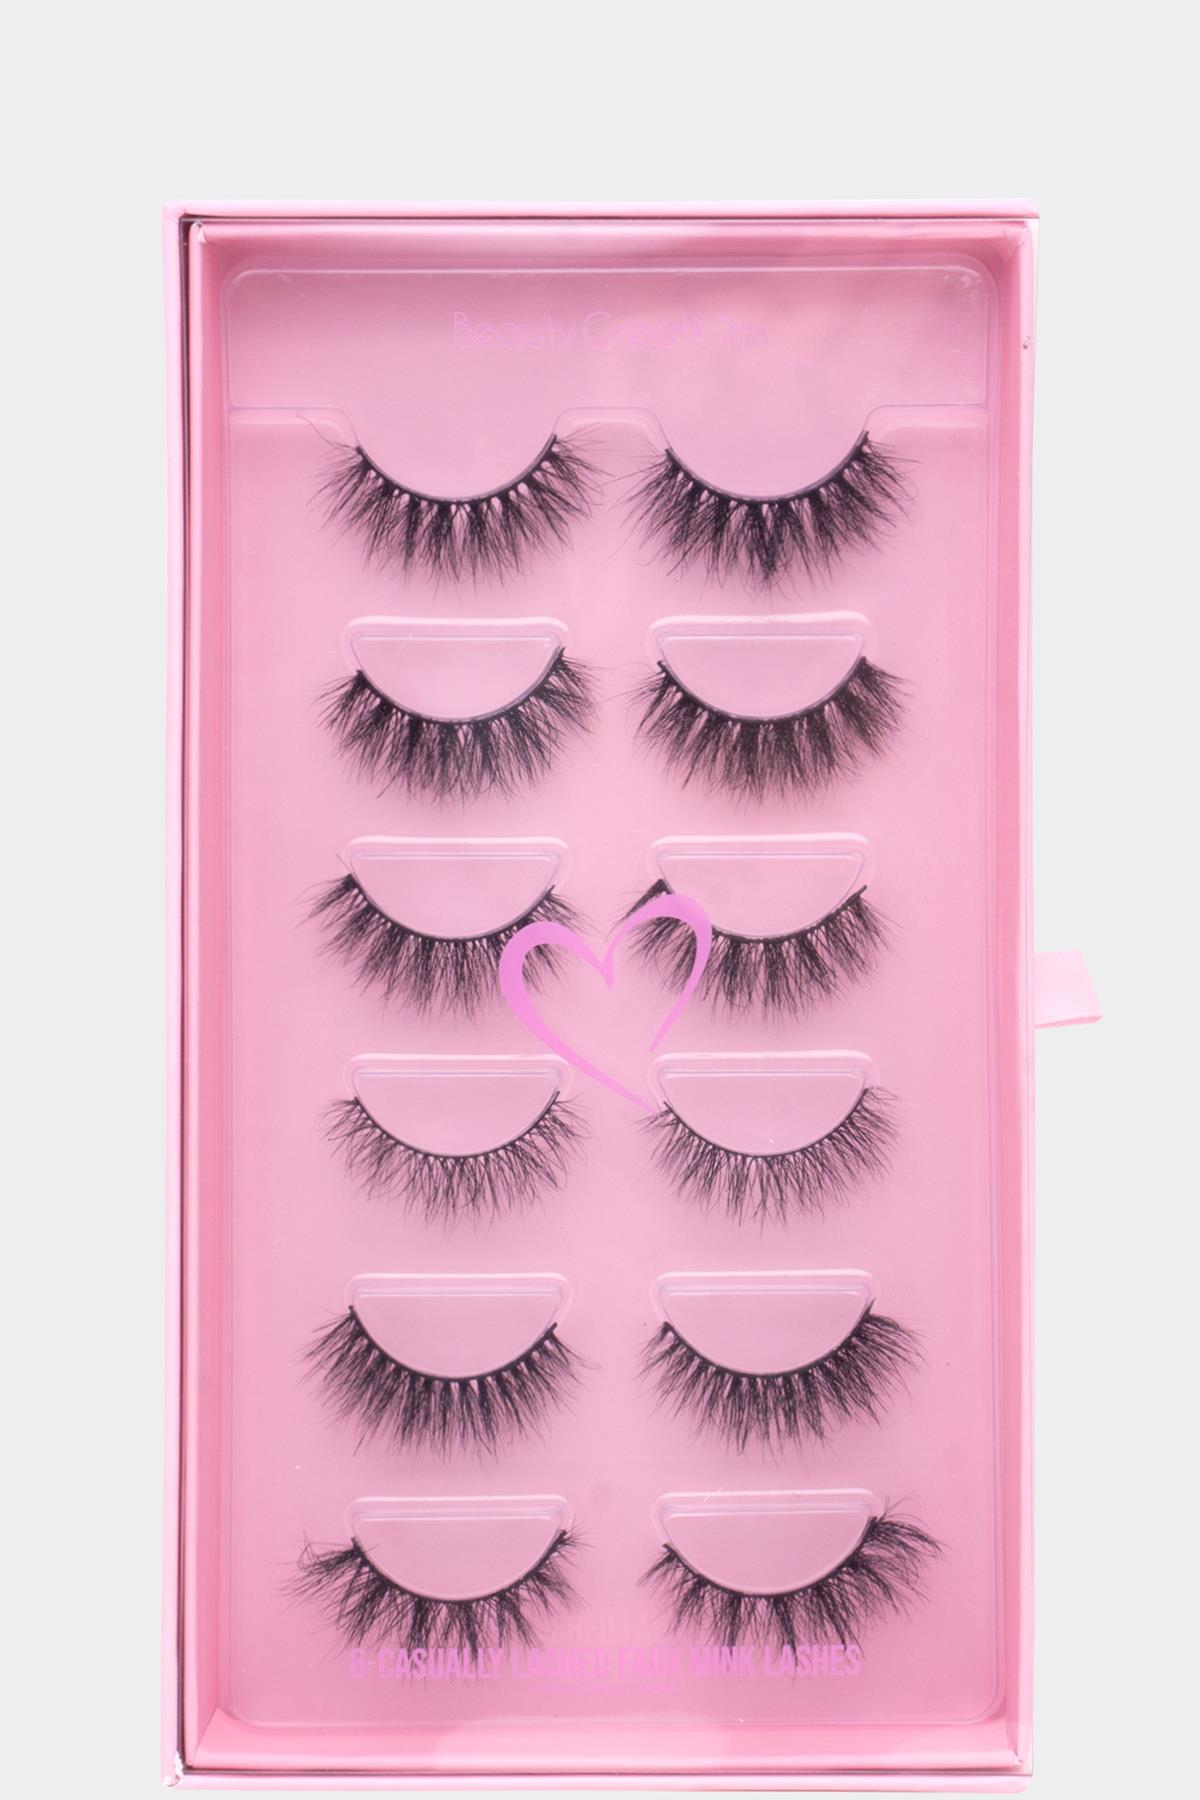 6 CASUALLY LASHED FAUX MINK LASHES SET